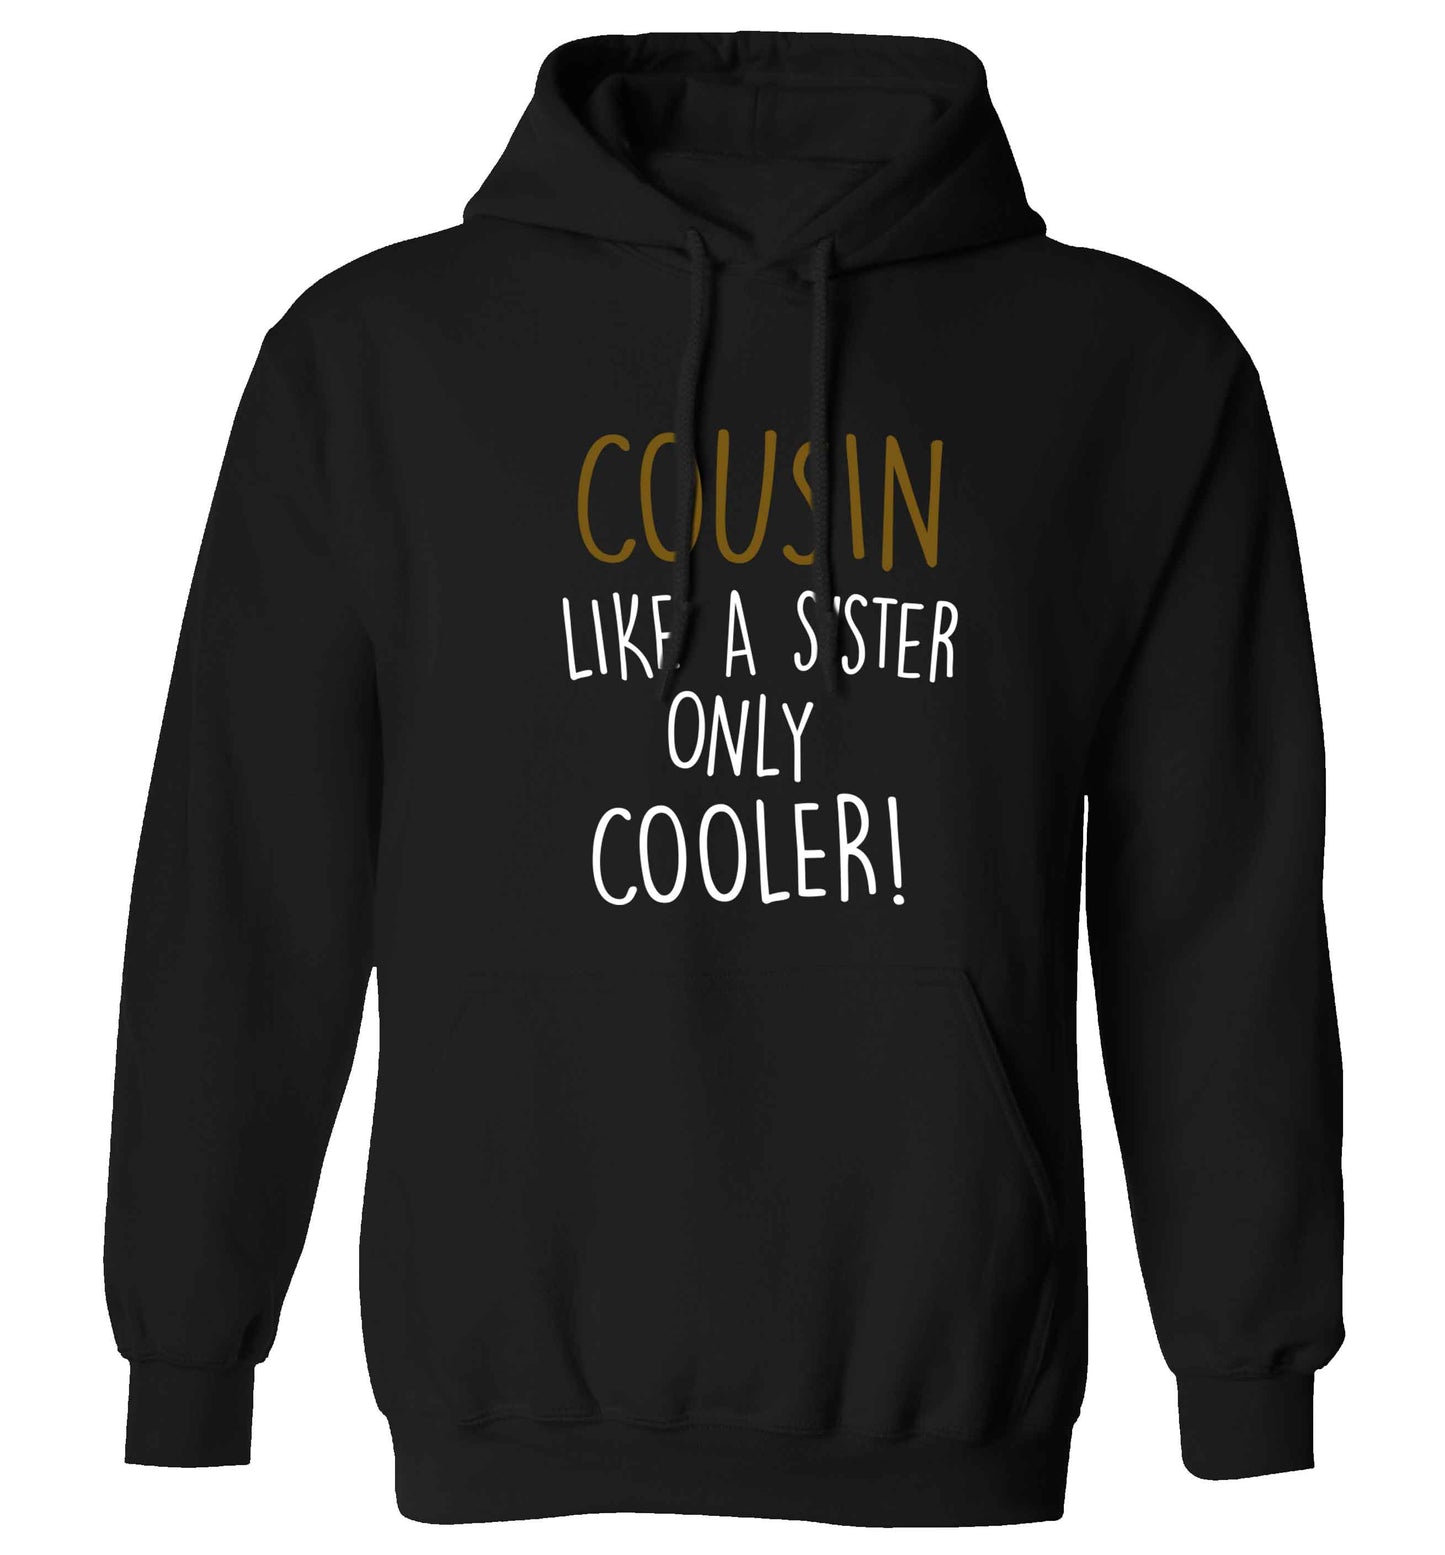 Cousin like a sister only cooler adults unisex black hoodie 2XL